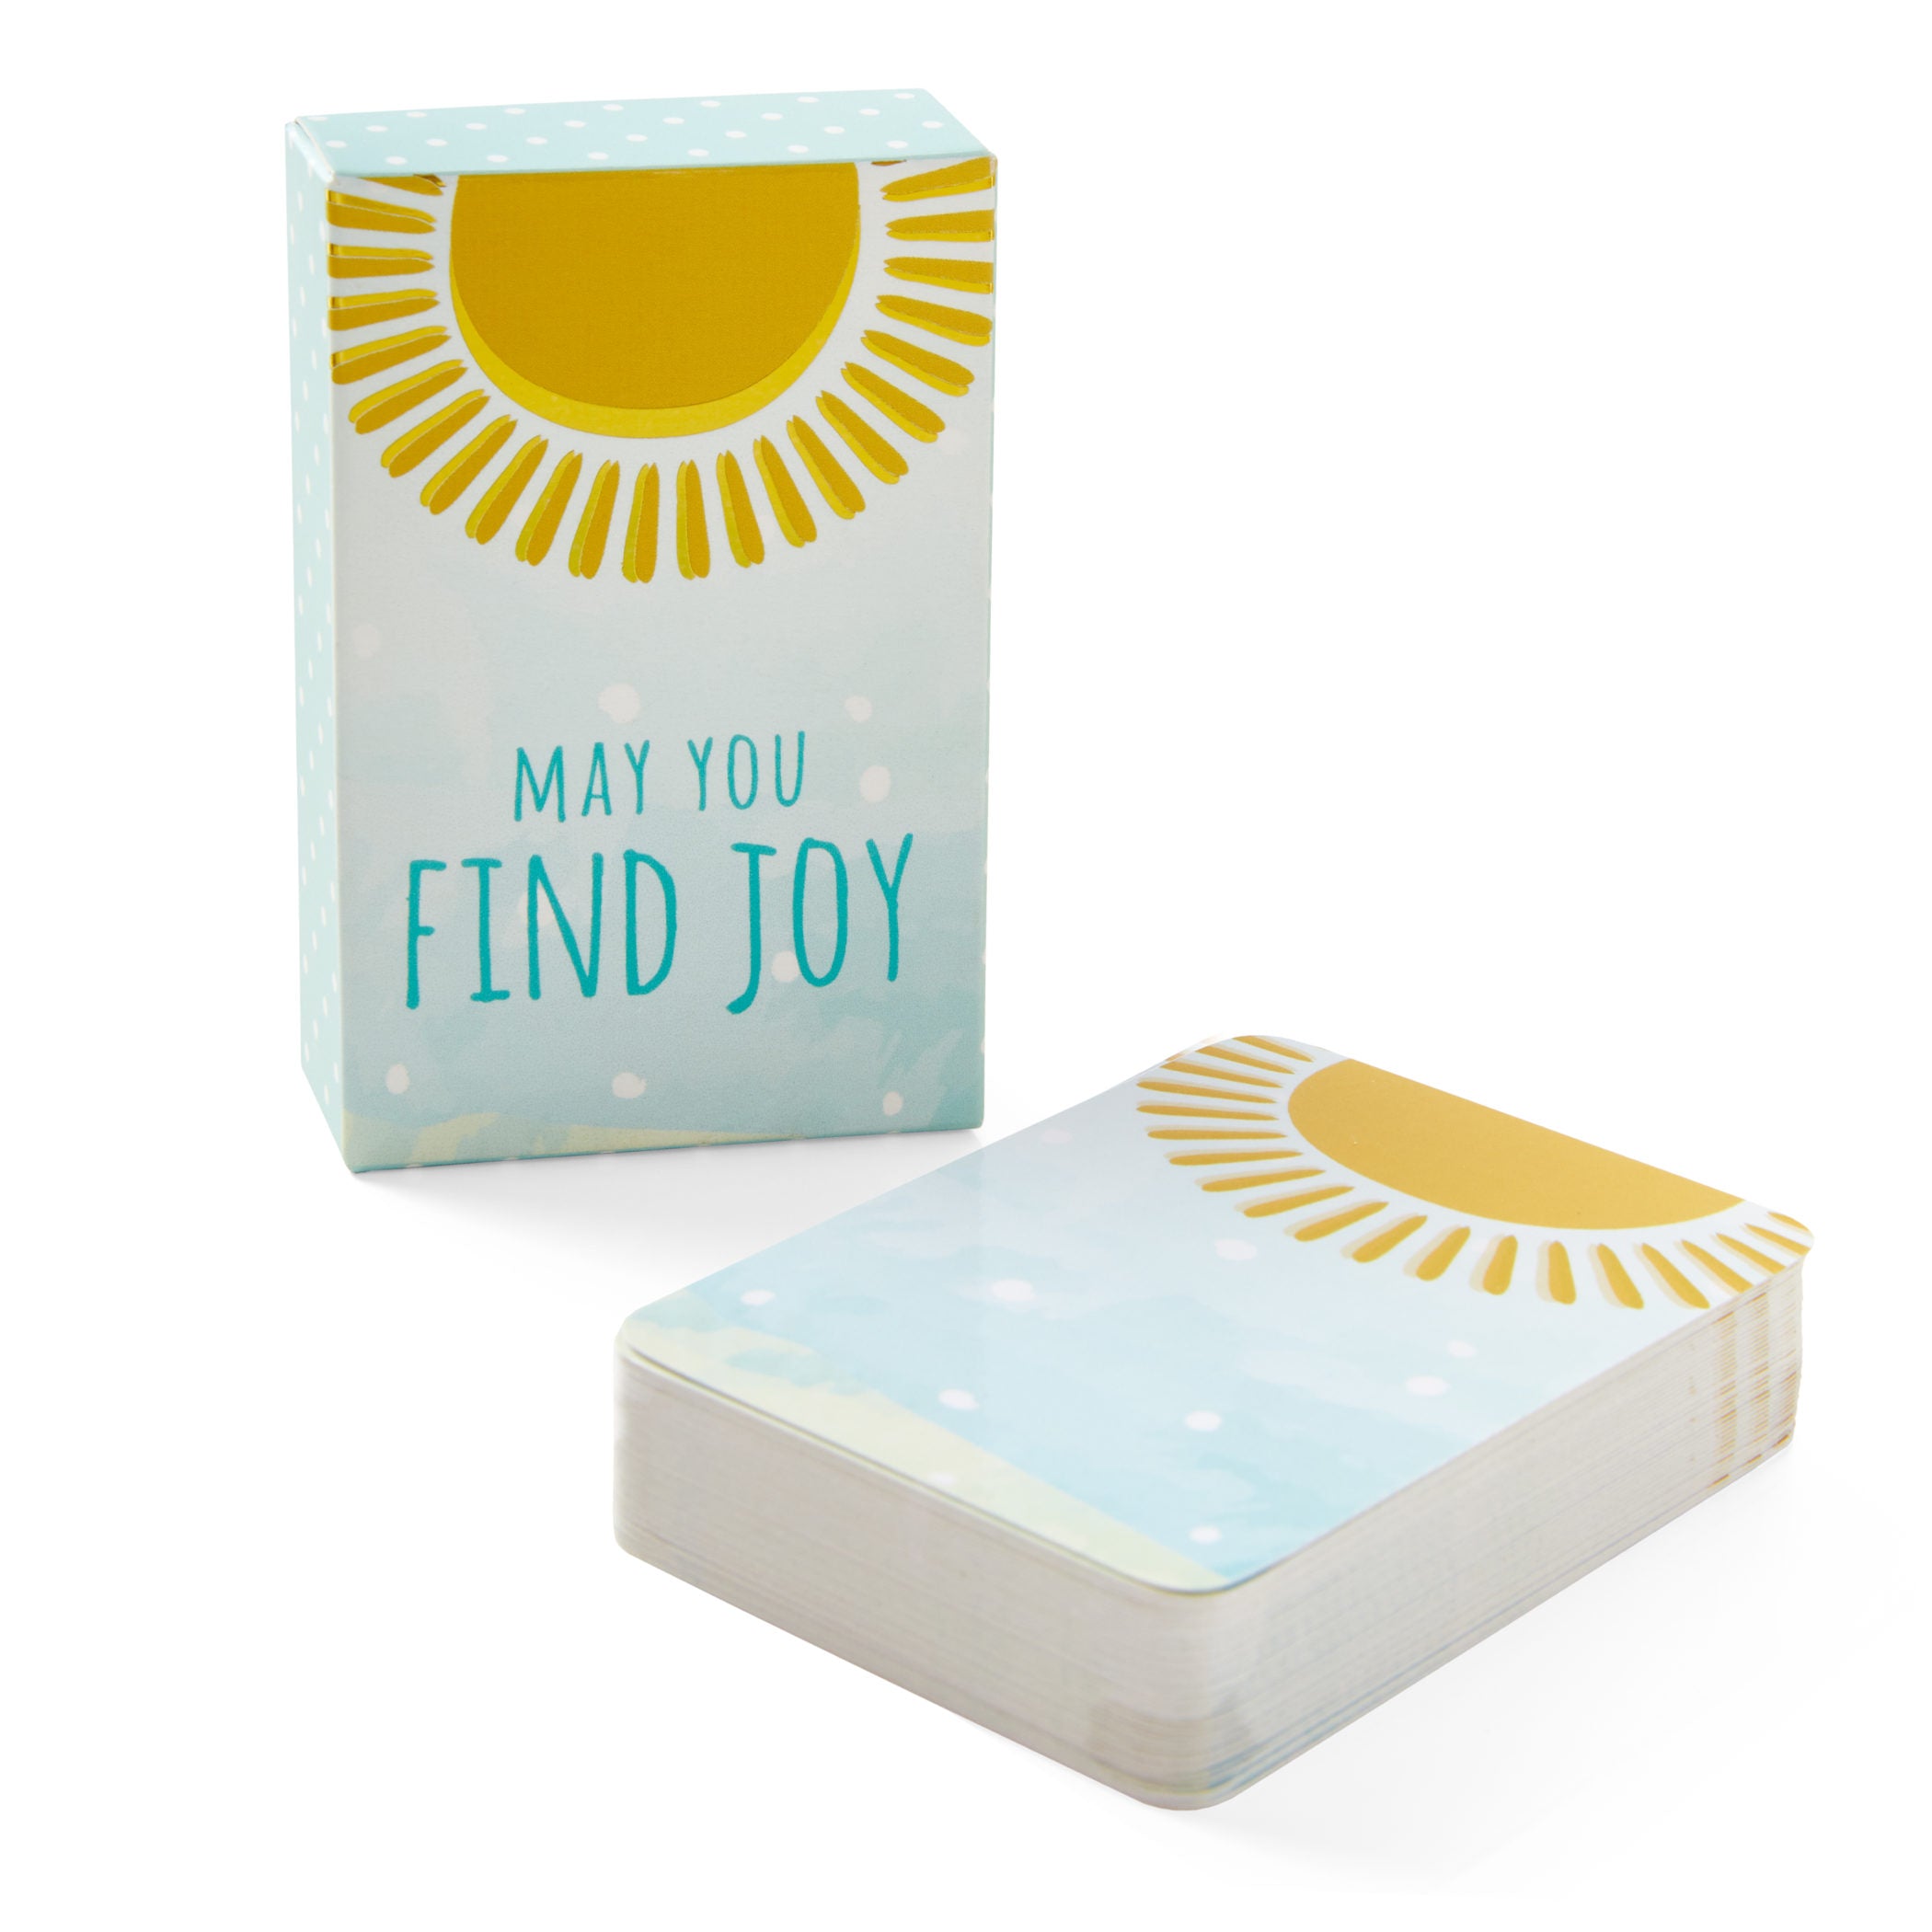 May You Know Joy - May You Find Joy Mini Deck